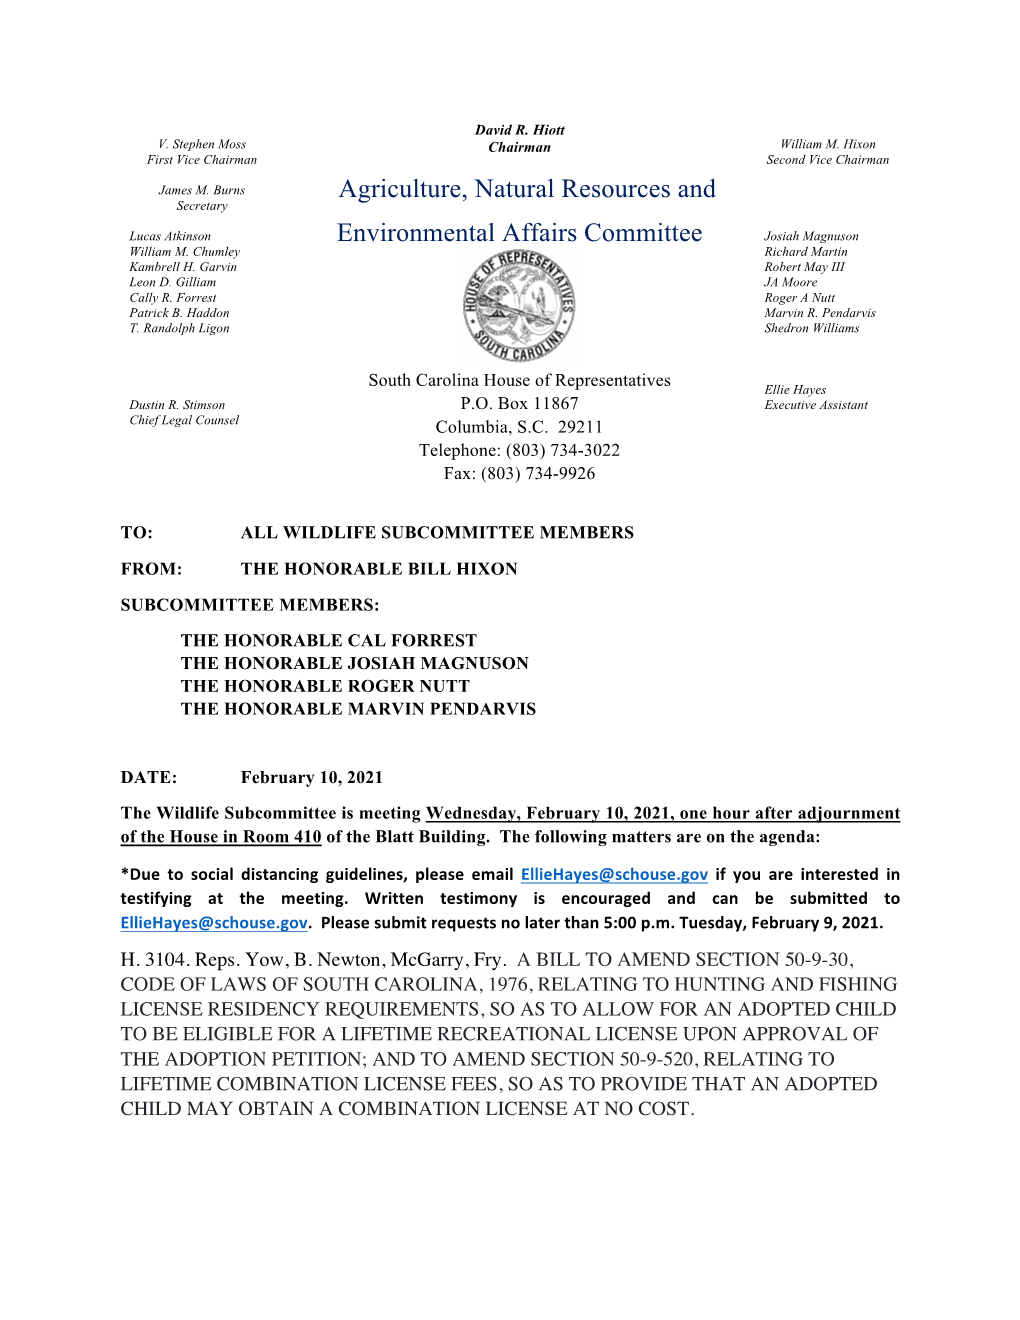 Agriculture, Natural Resources and Environmental Affairs Committee